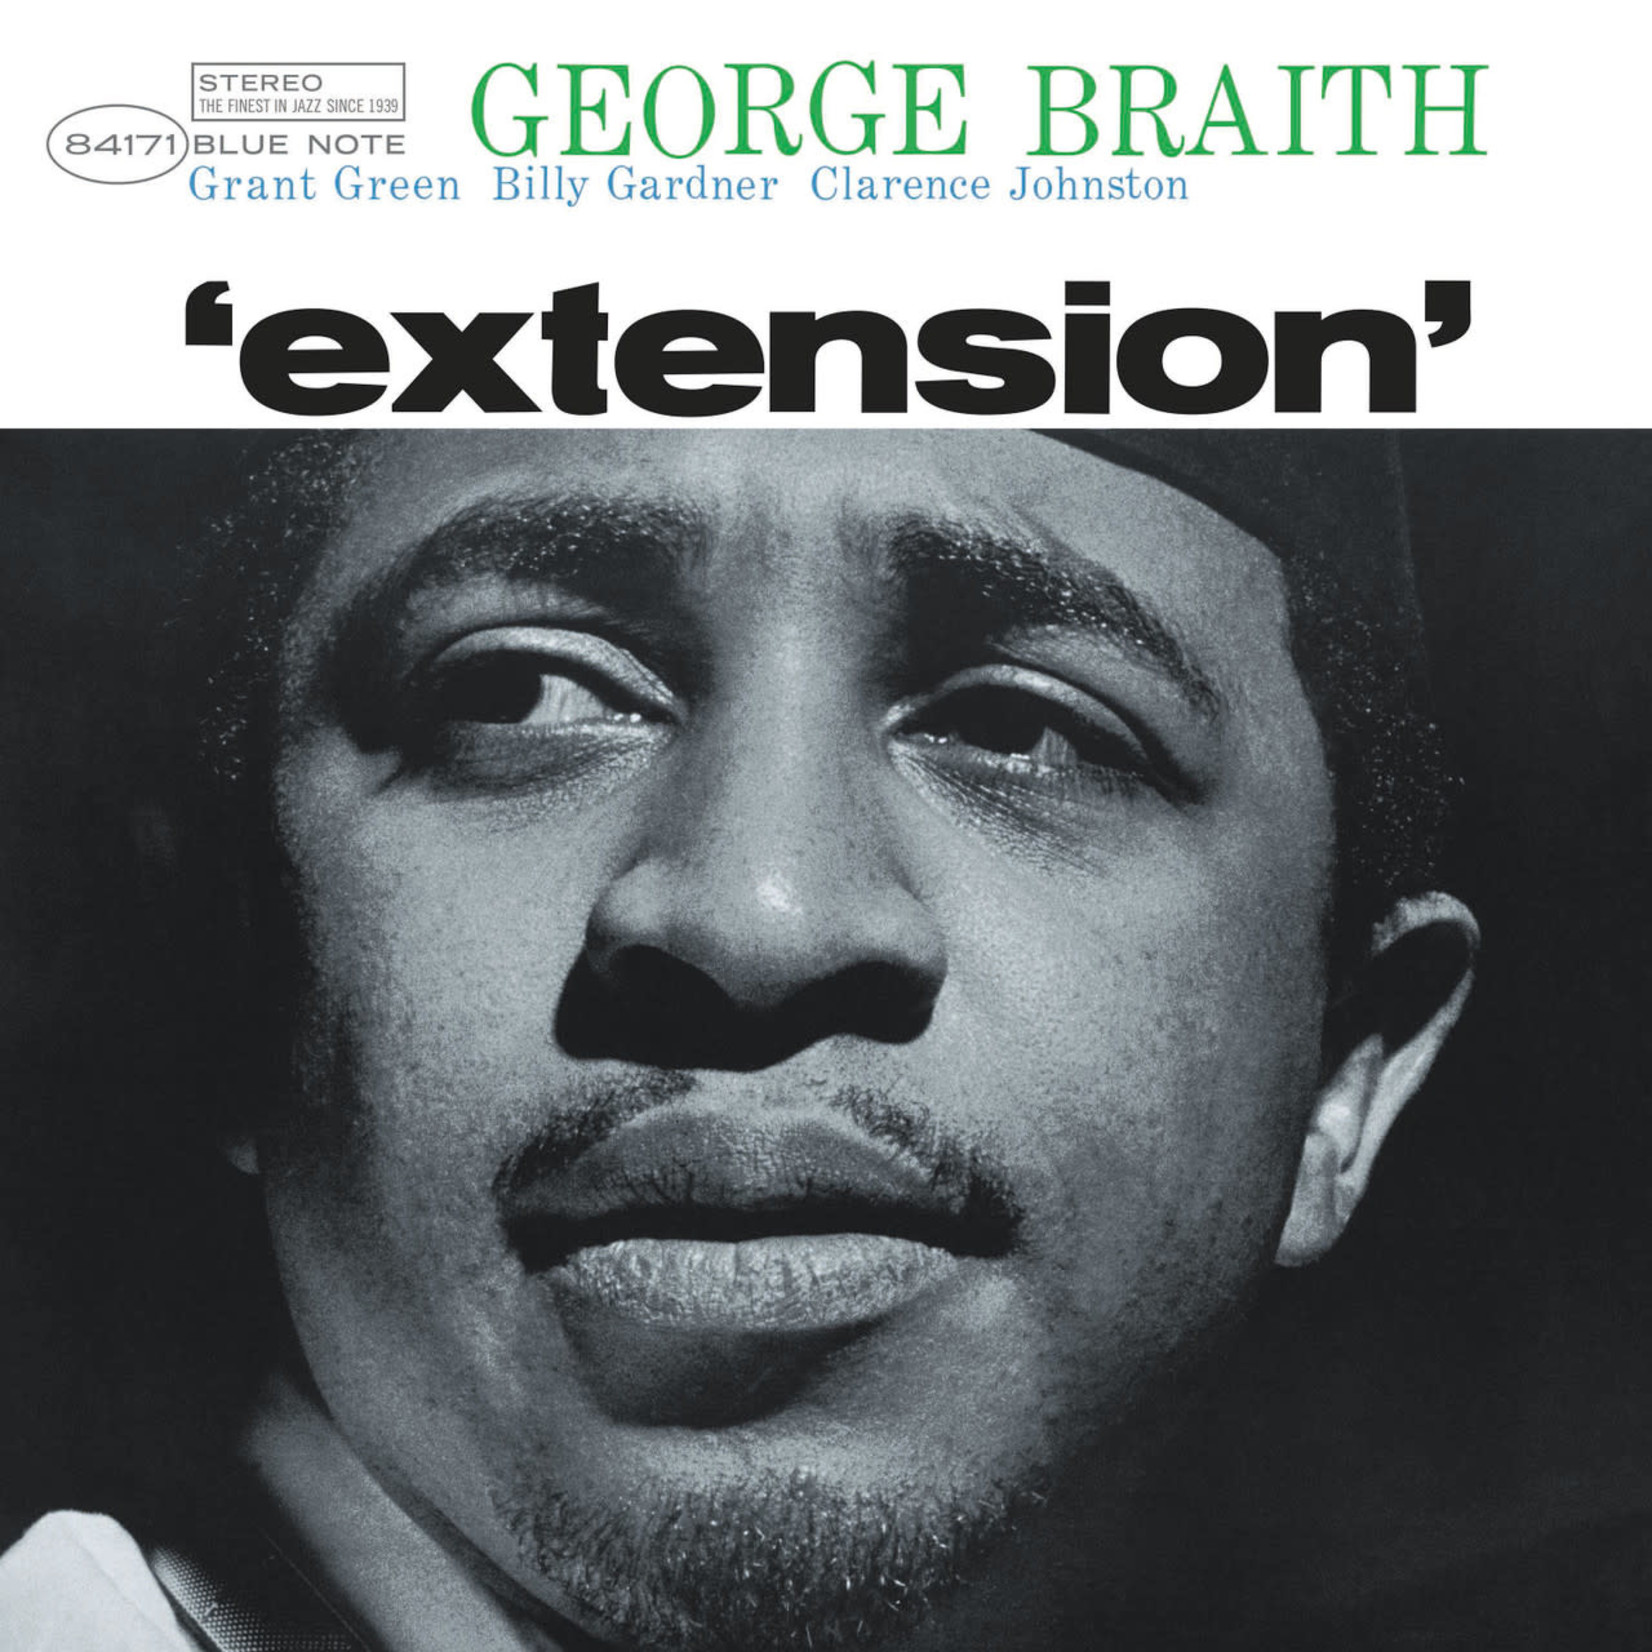 [New] George Braith - Extension (Blue Note Classic Vinyl series)